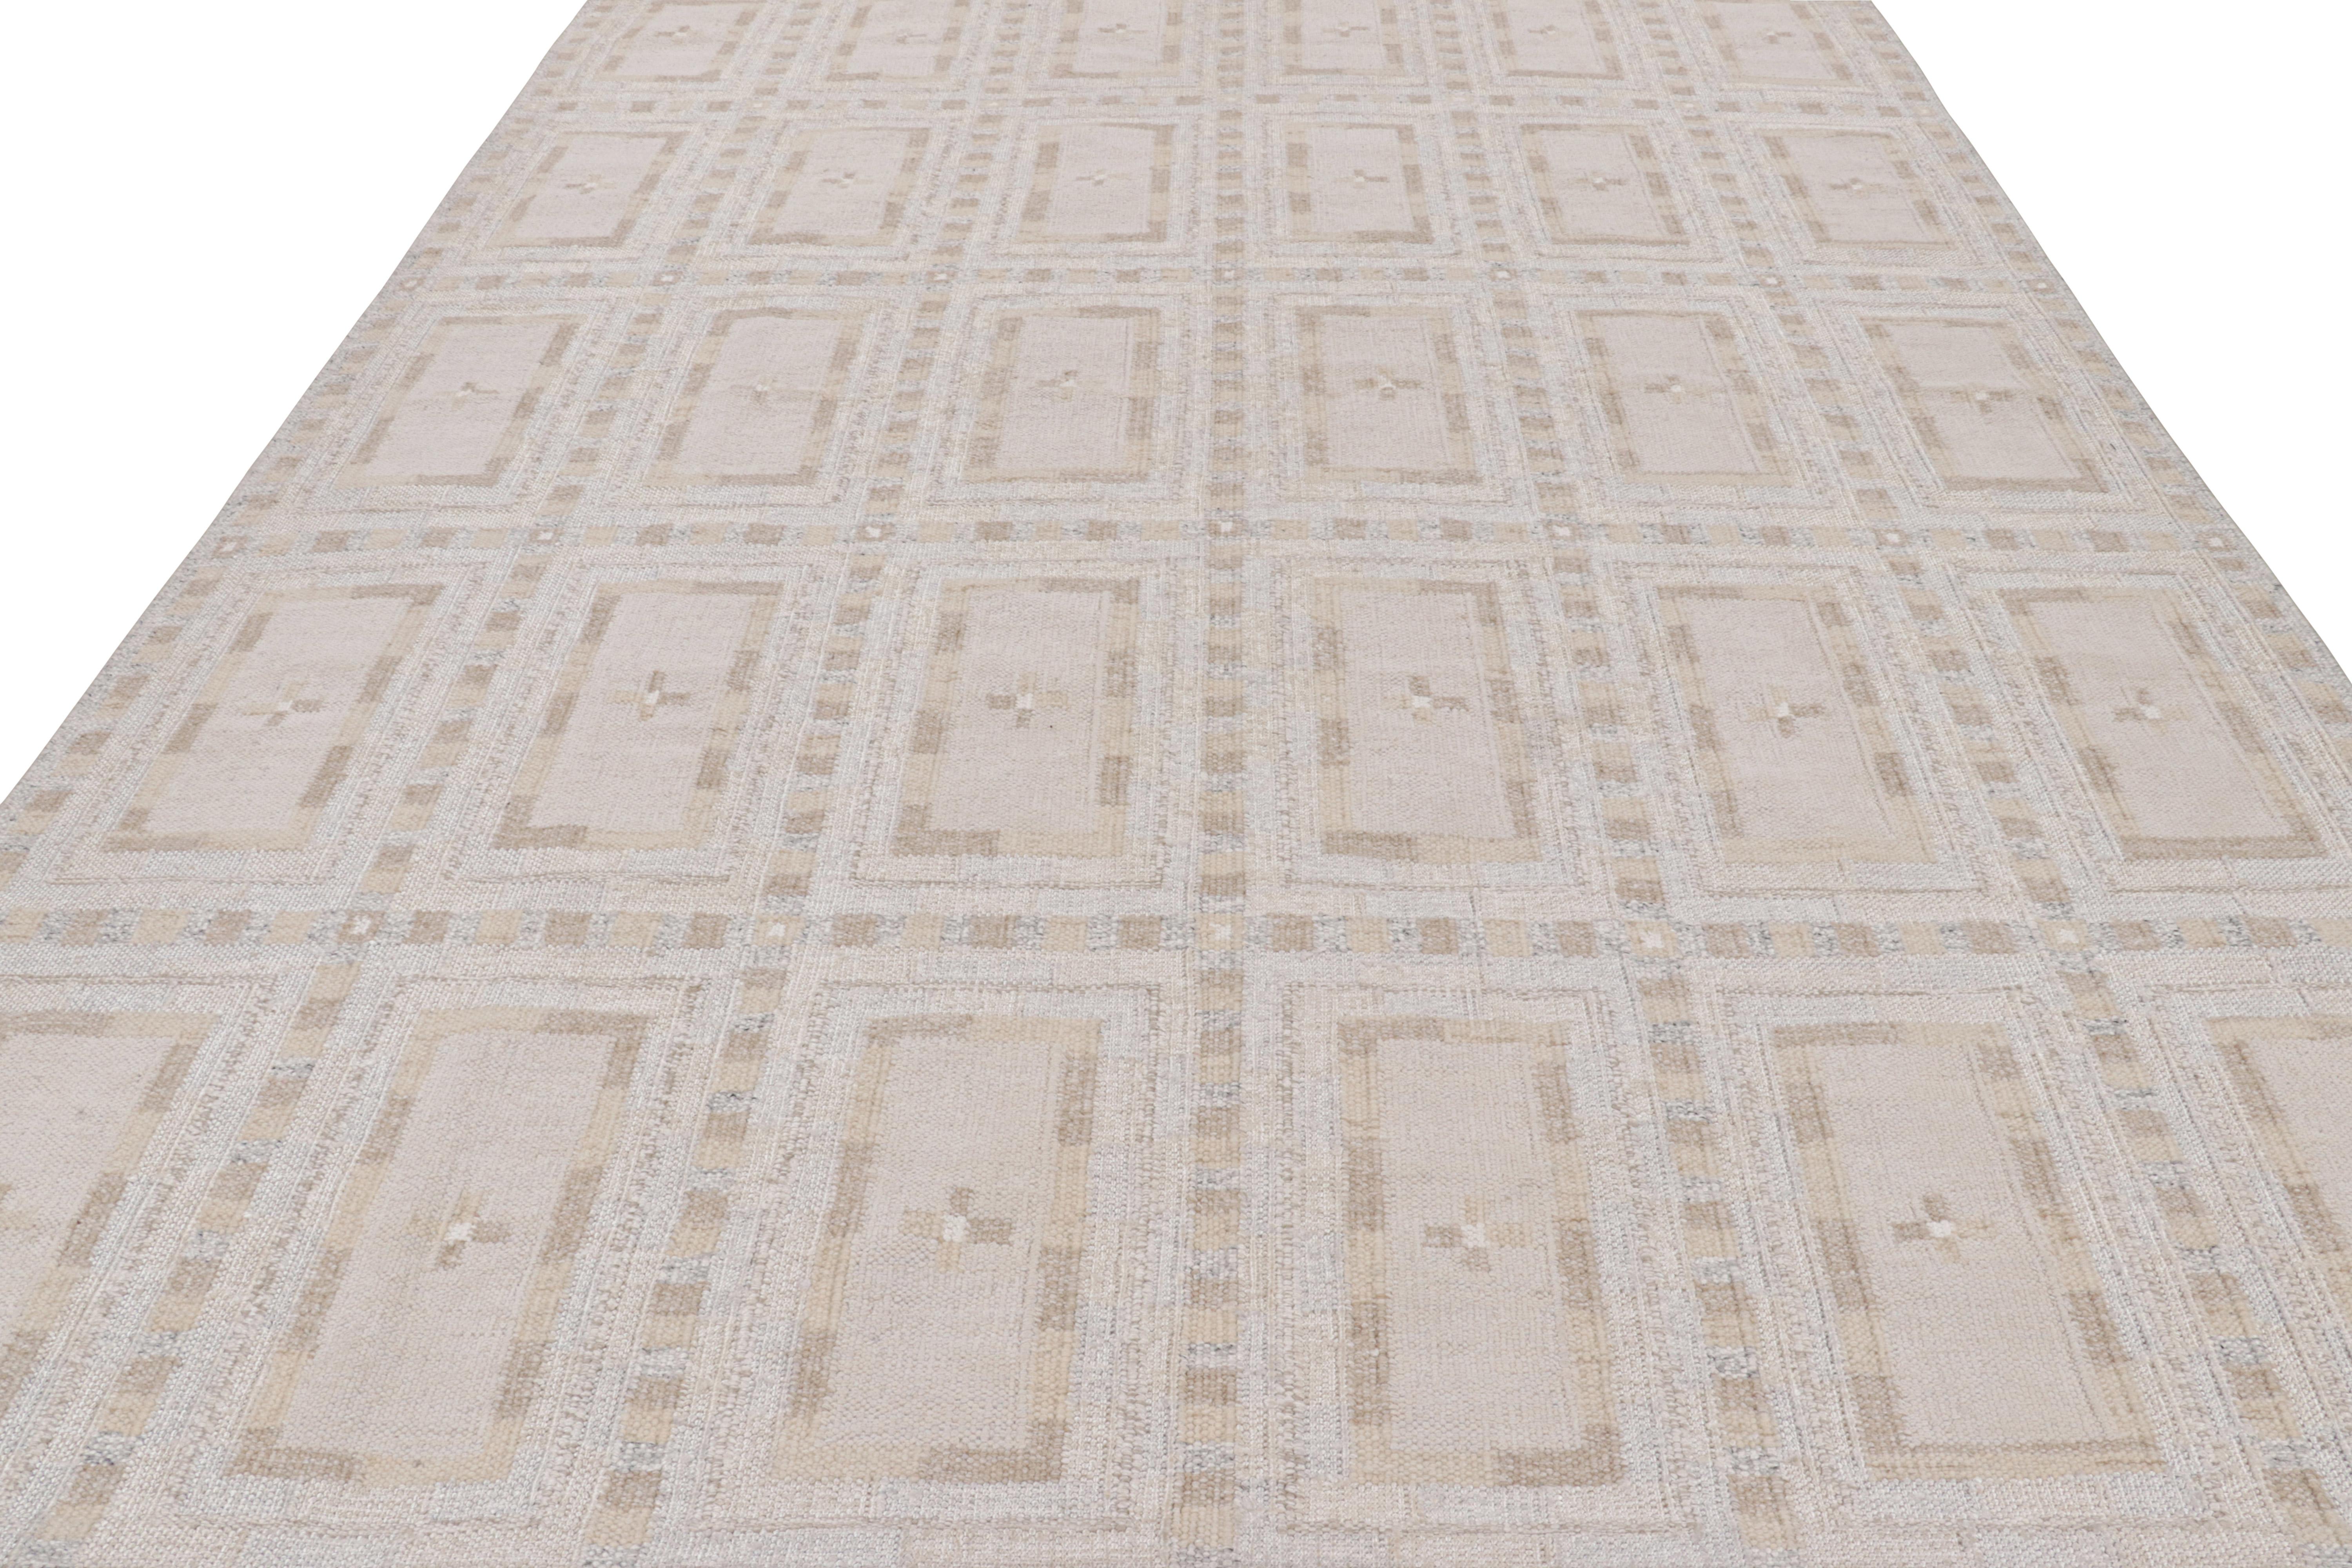 Hand-Woven Rug & Kilim’s Scandinavian Style Rug with White and Beige-Brown Patterns For Sale